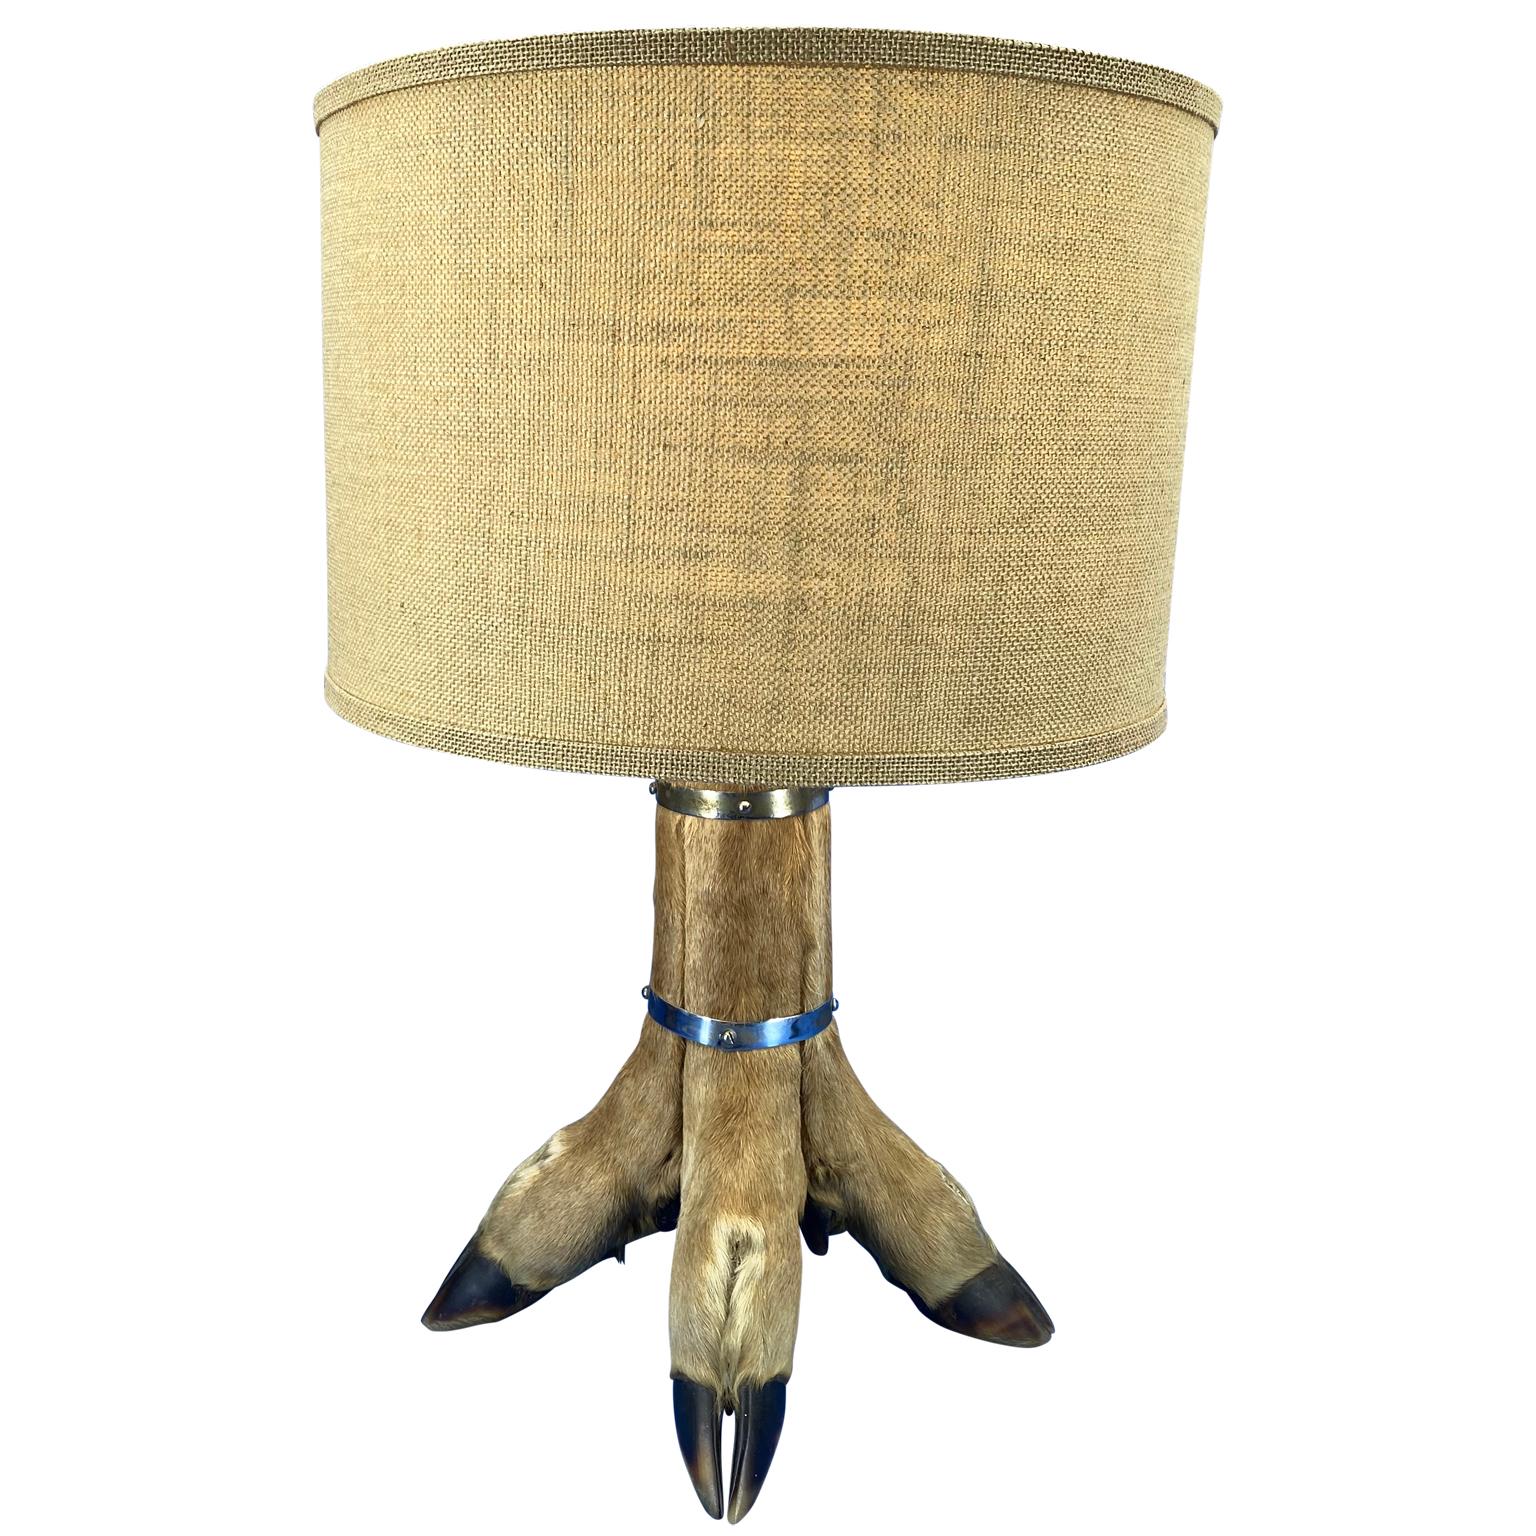 Folk Art Table Lamp With 4 Tier Deer Hoof With Nickel Bands And Antler Finial For Sale